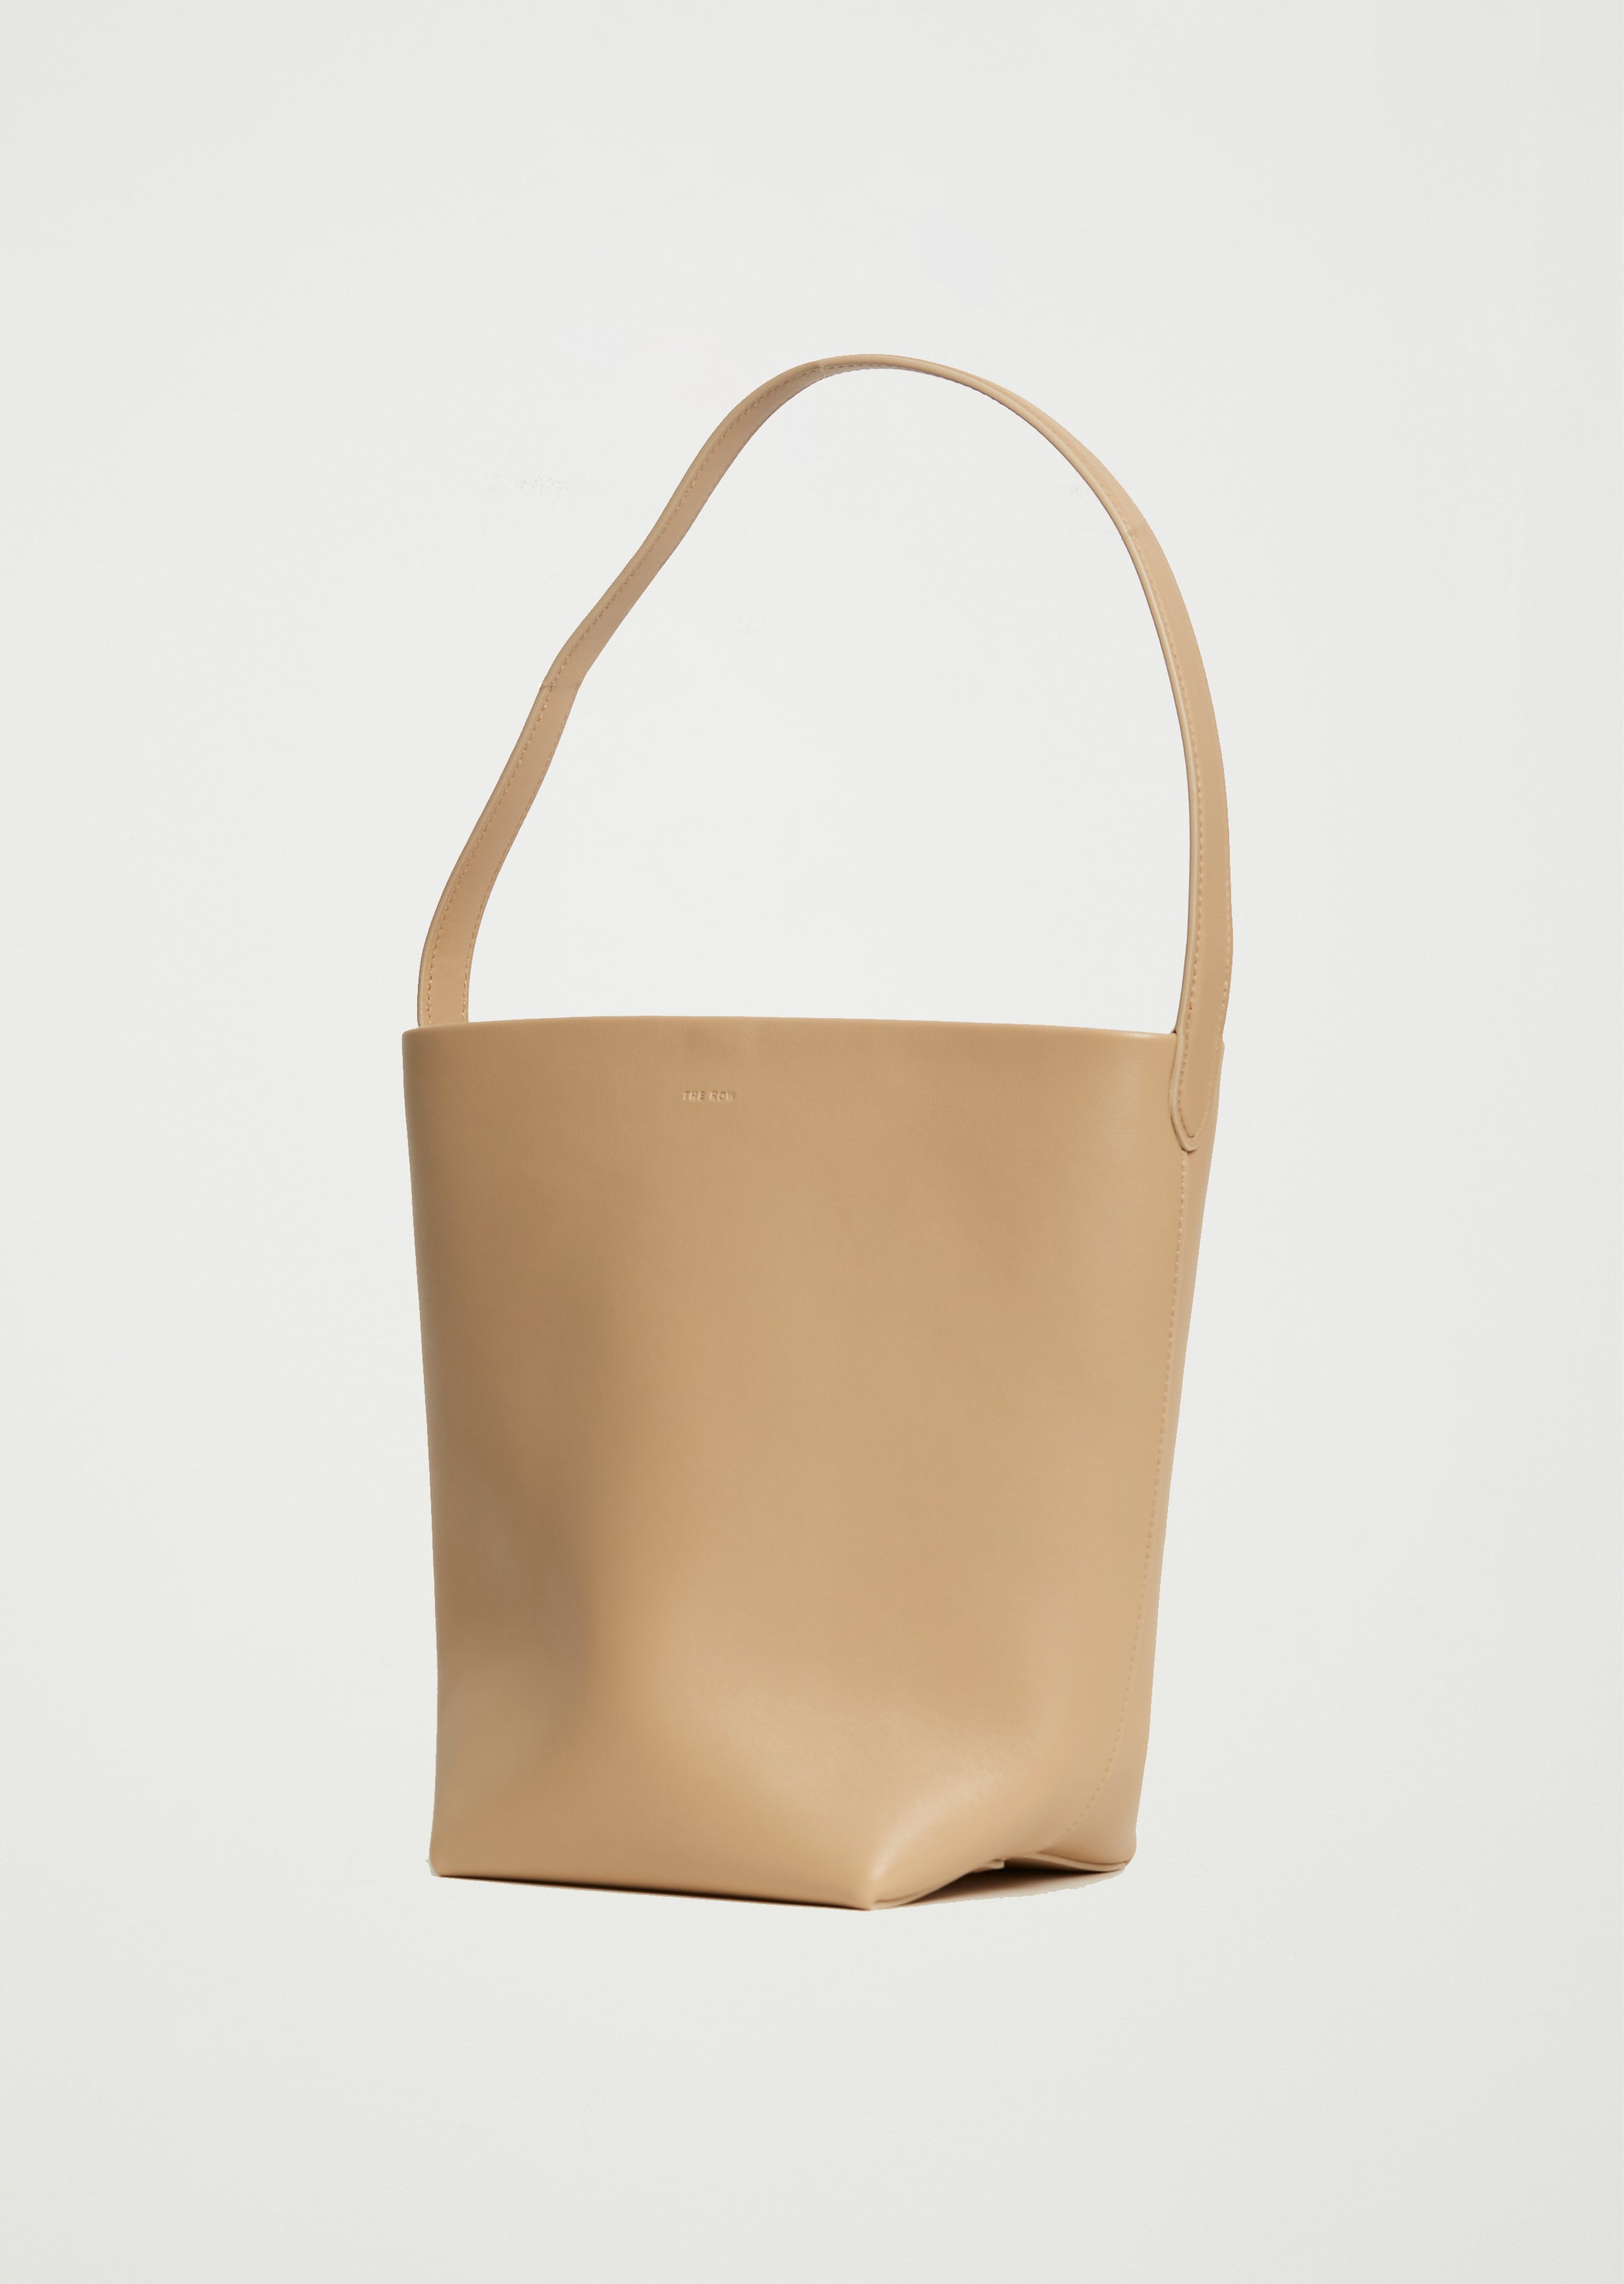 THE ROW Totes for Women